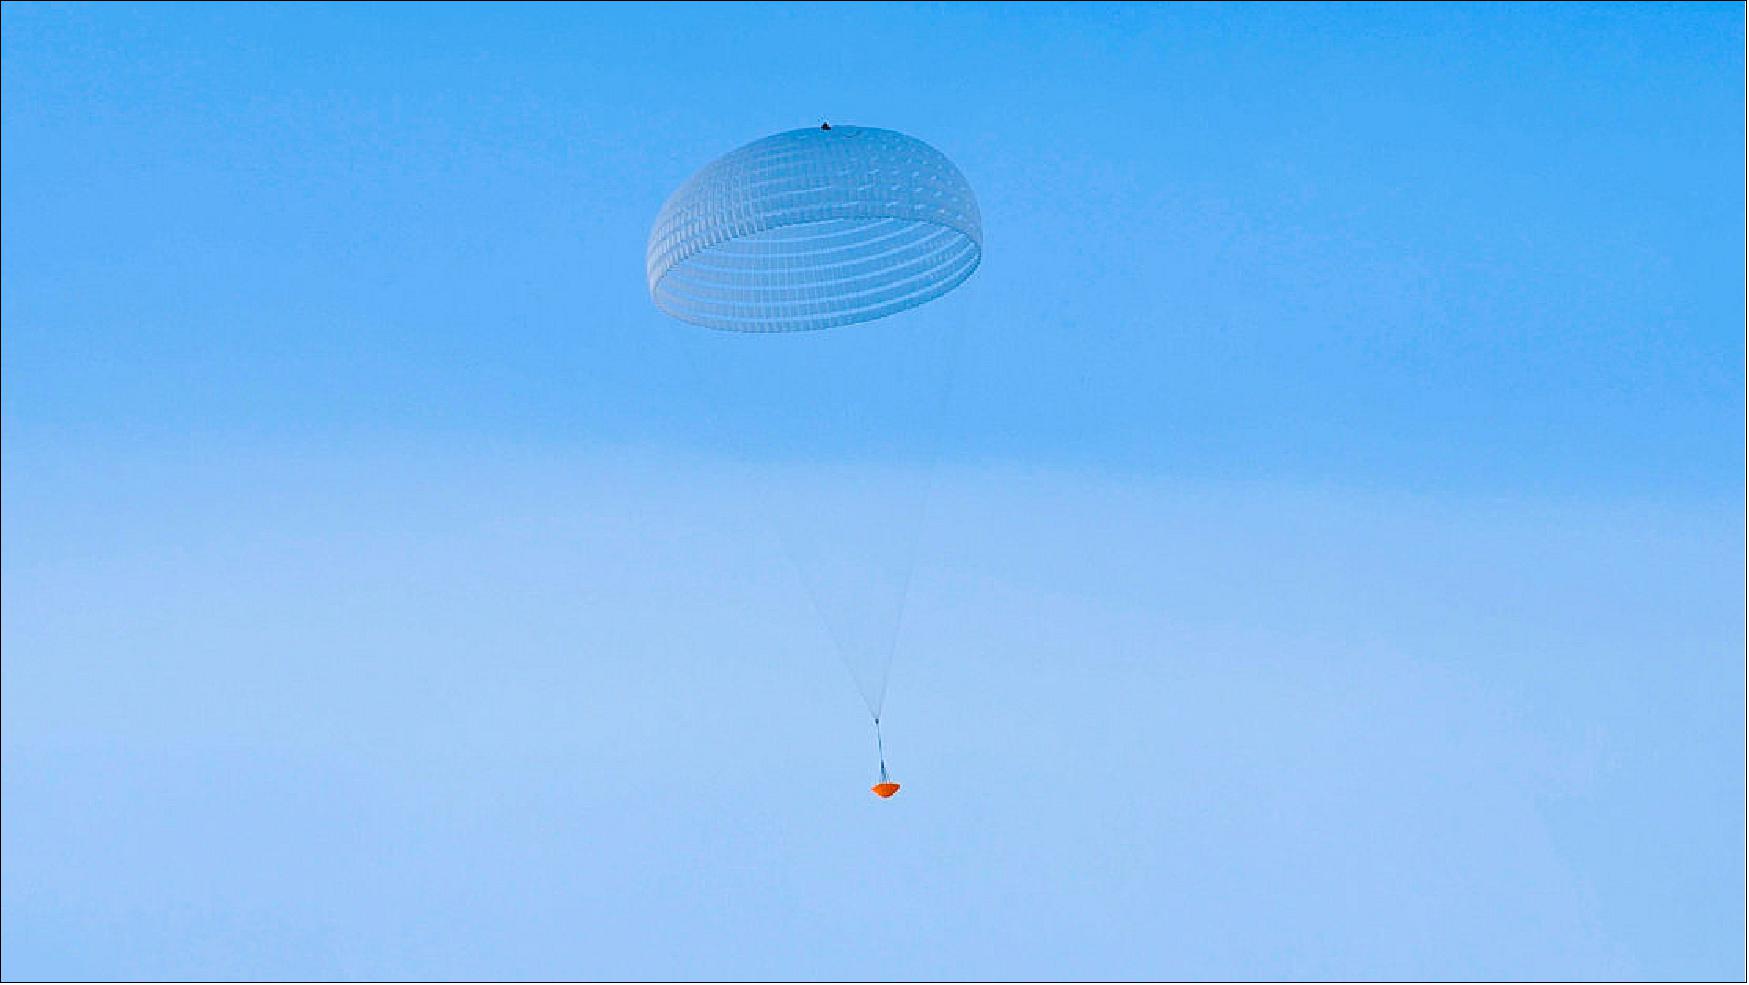 Figure 93: The deployment of the large 35 m-wide parachute of the upcoming ExoMars 2020 mission was tested in a low-altitude drop test earlier this month. The image captures the inflated ring-slot parachute with the drop test vehicle suspended underneath (image credit: ESA/I.Barel)